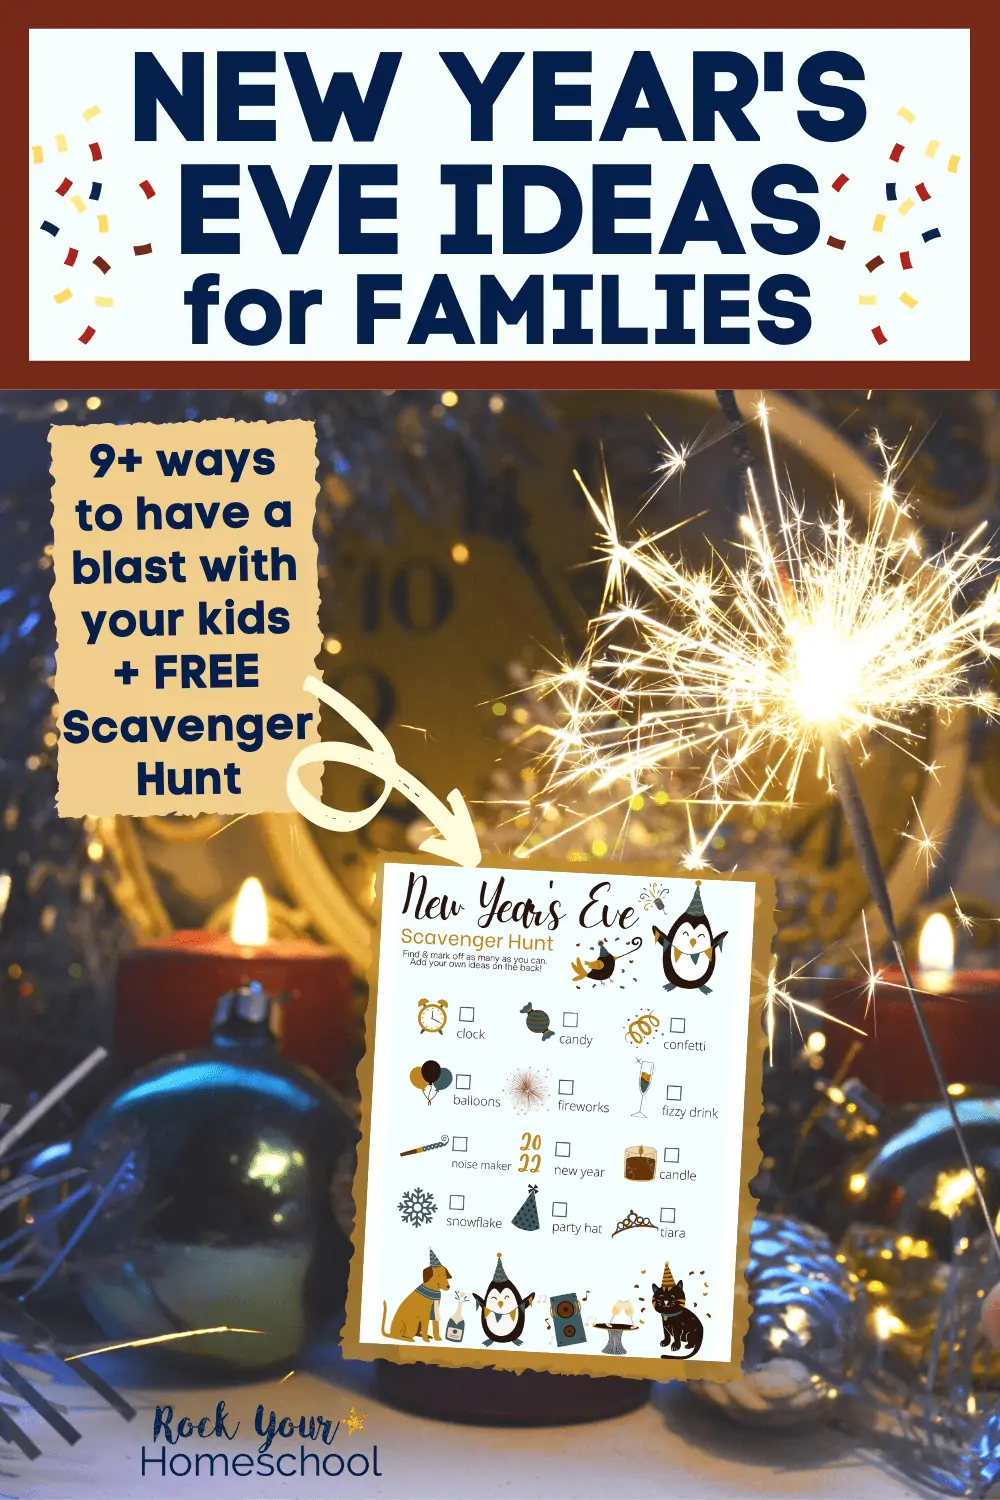 9+ New Year’s Eve Ideas for Families to Enjoy a Fun Celebration